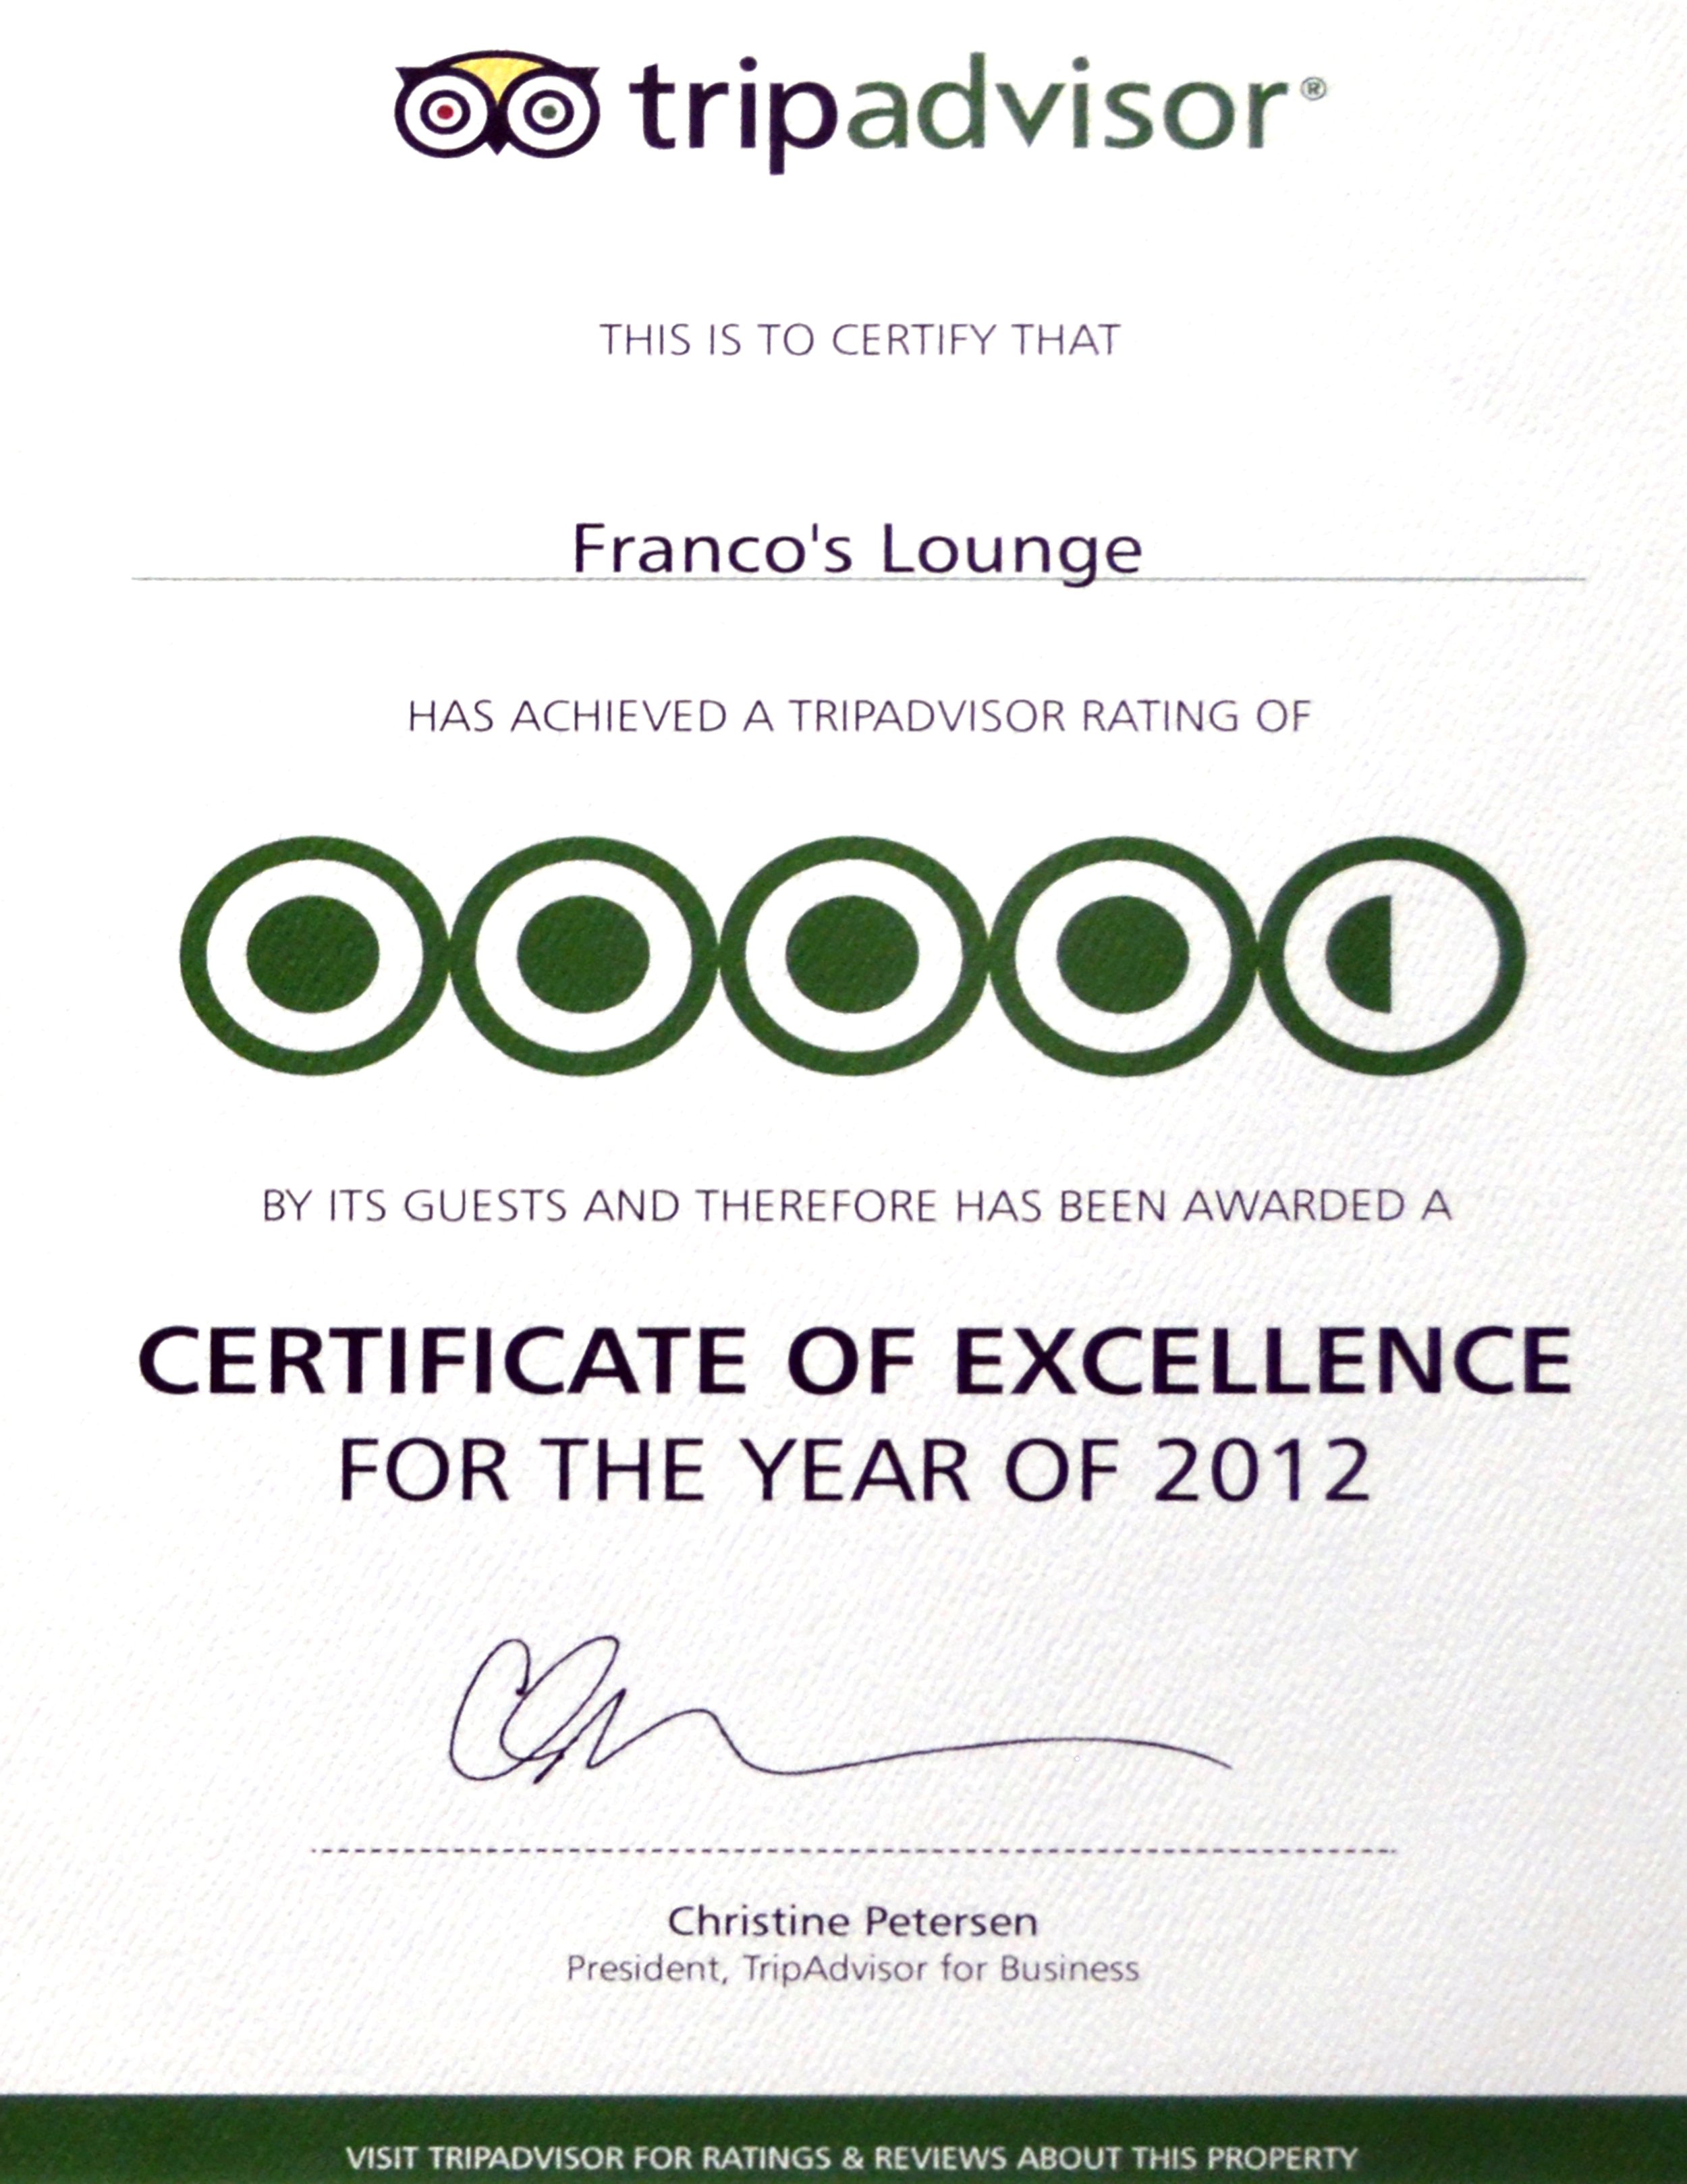 TA Certificate of excellence 2012.jpg